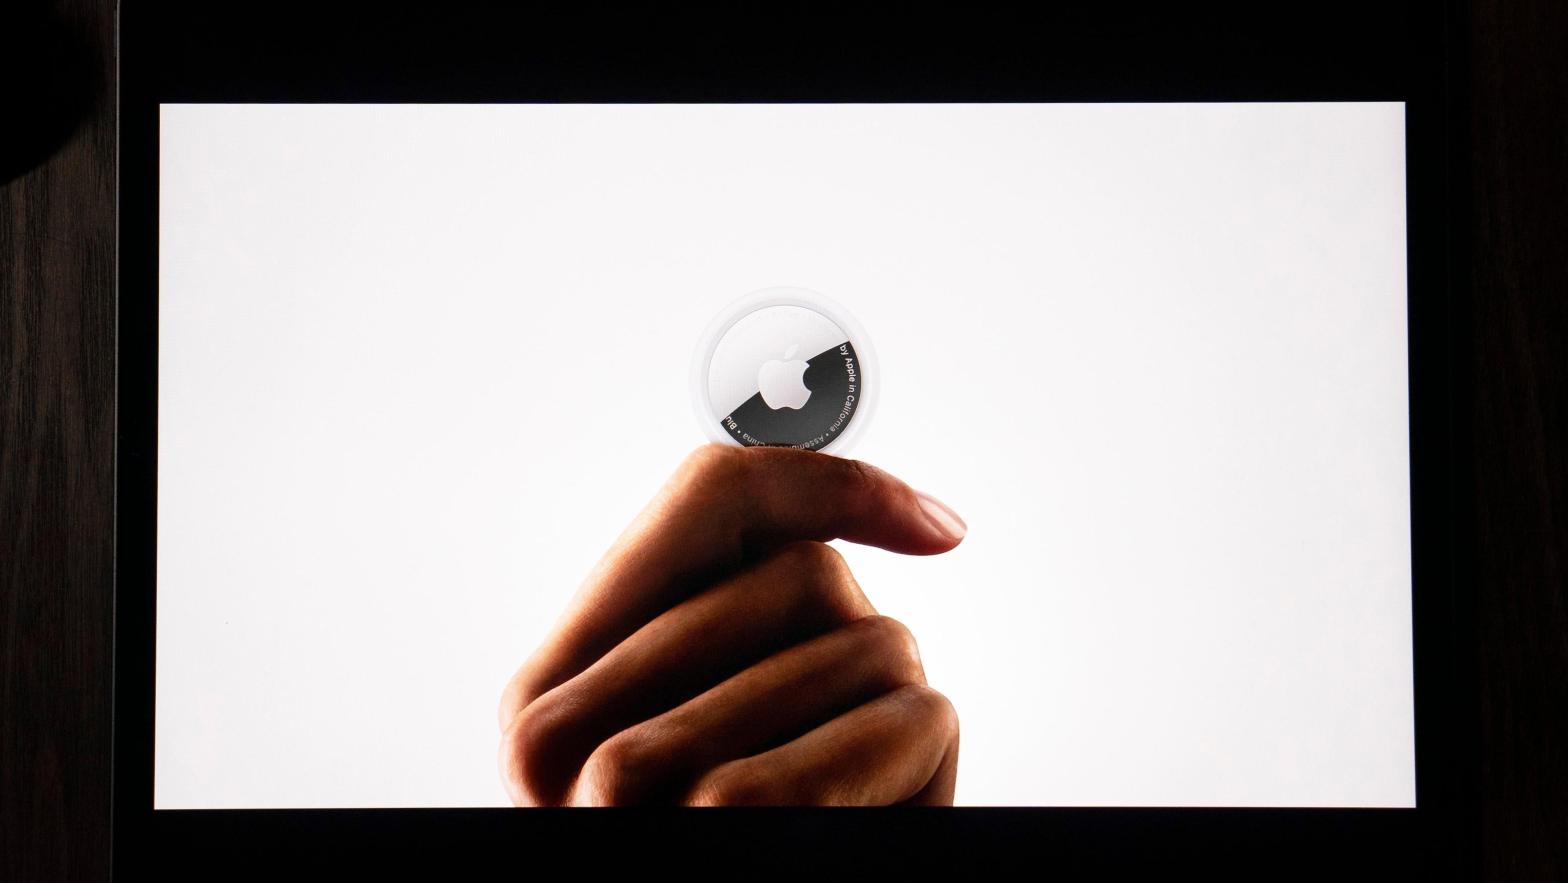 The AirTag tracking device is introduced during a virtual event held to announce new Apple products, Tuesday, April 20, 2021. (Photo: Jae C. Hong, AP)